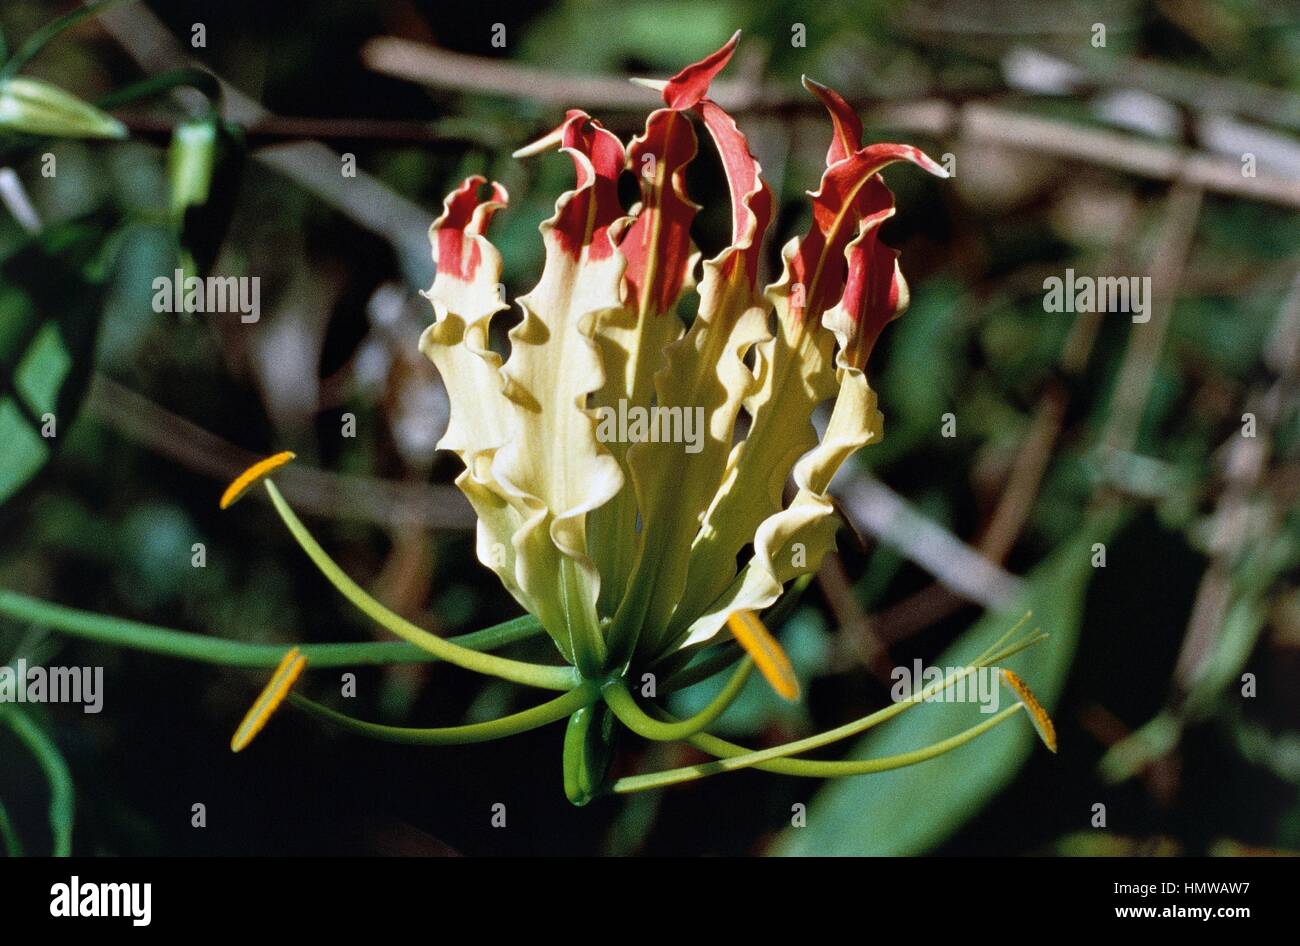 Flame lily, Glory lily or Climbing lily (Gloriosa rothschildiana or Gloriosa superba), Colchicaceae. Stock Photo